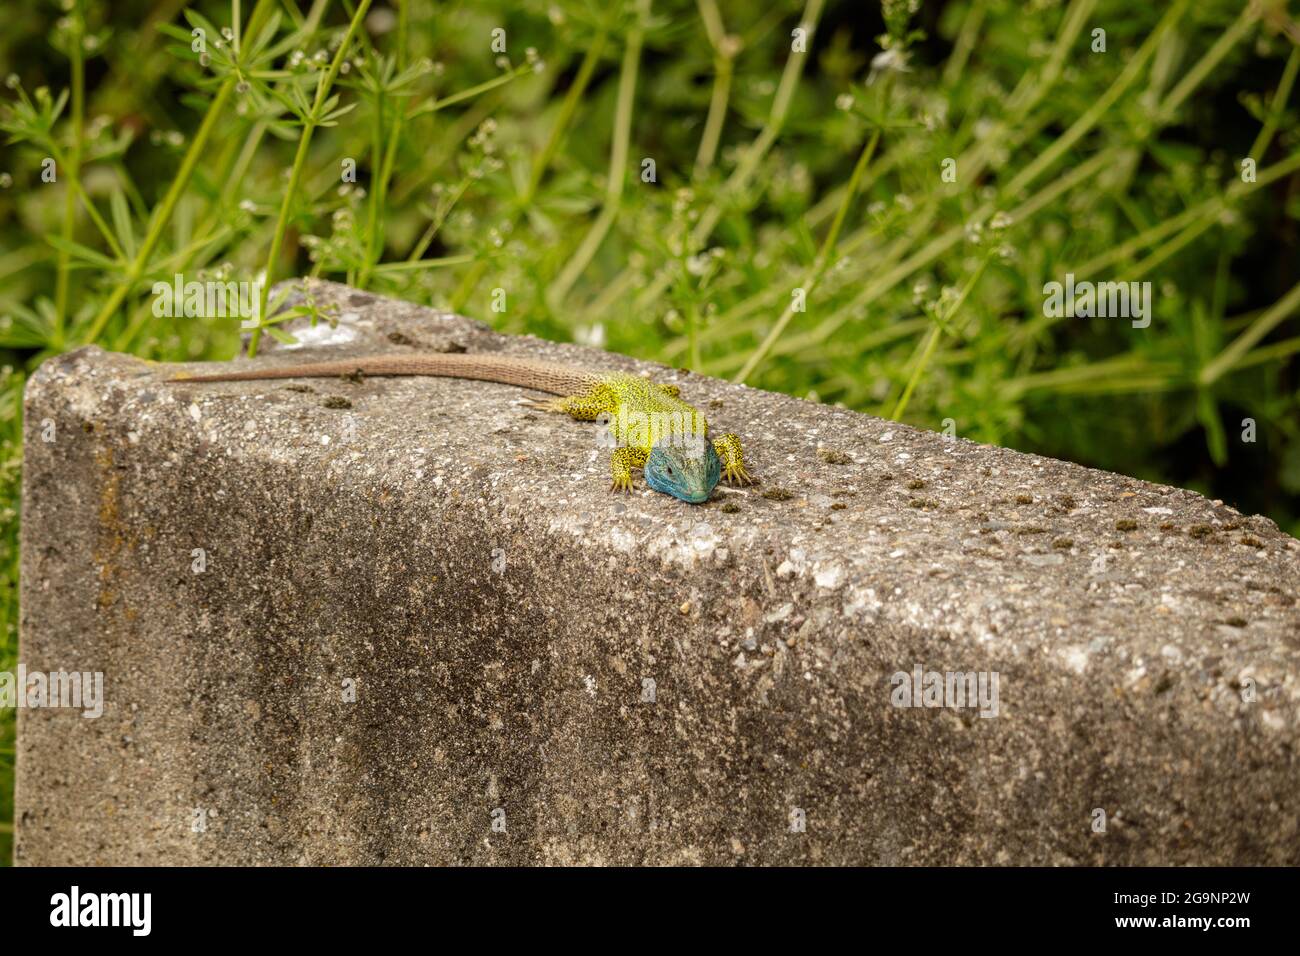 Blue and yellow Lacerta schreiberi lizard basking in the sun on a cement block in Spain Stock Photo